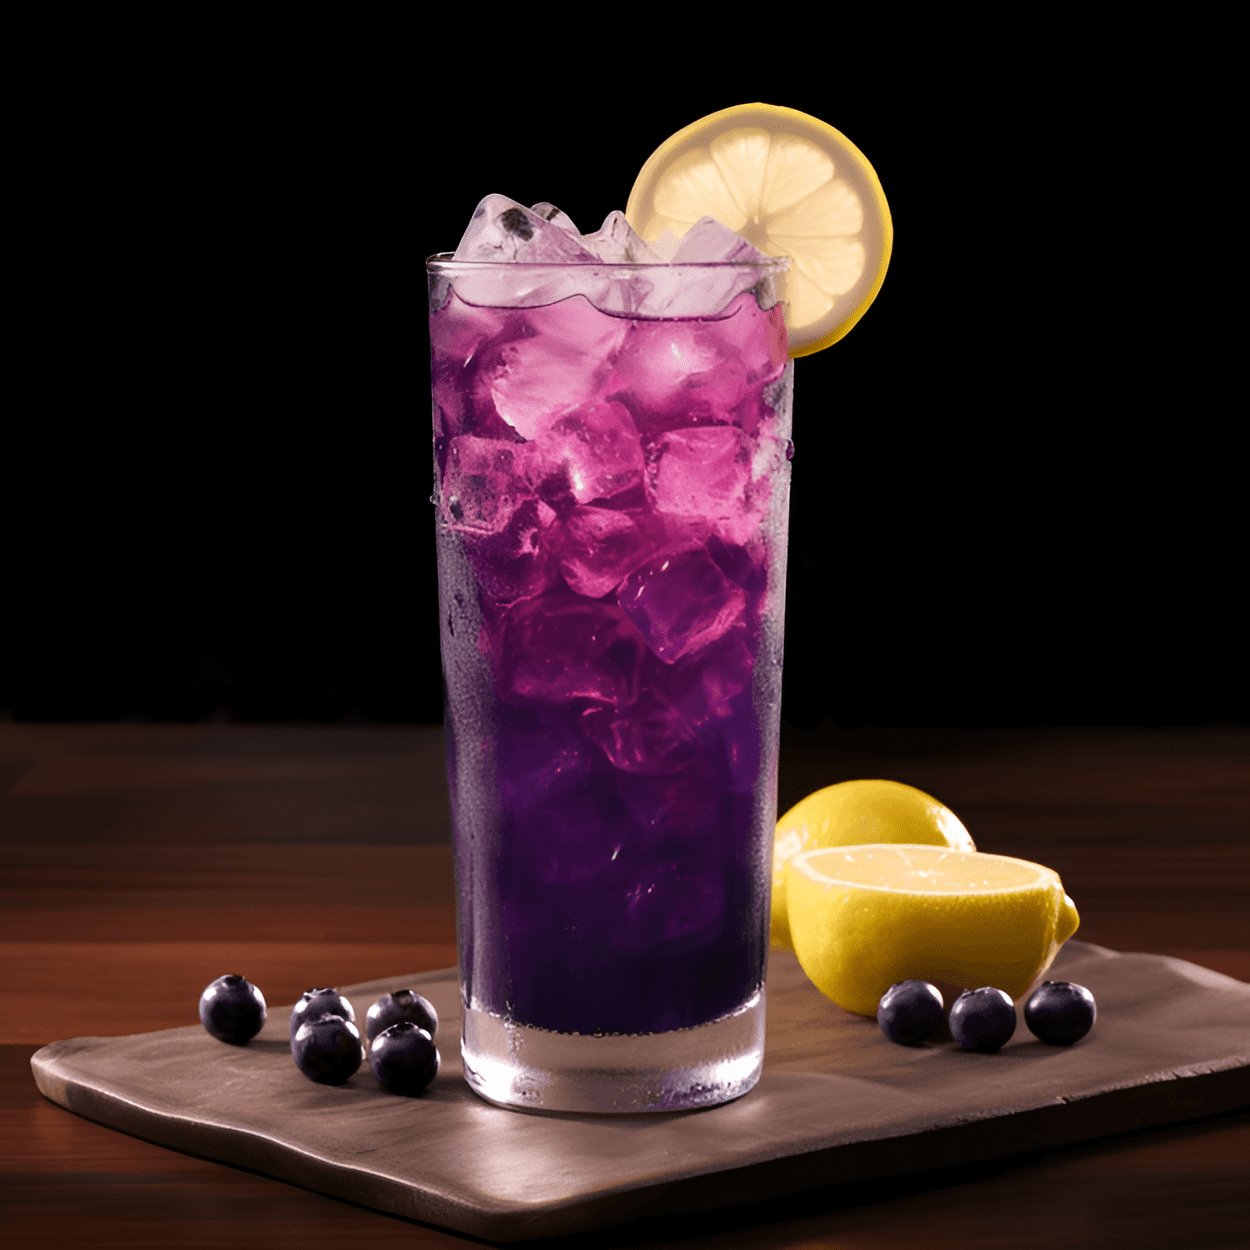 Blueberry Crush Cocktail Recipe - The Blueberry Crush is a refreshing, slightly sweet, and fruity cocktail. The taste of fresh blueberries is prominent, balanced by the tartness of the lemon and the slight burn of the vodka. The soda water adds a bubbly texture, making it a light and enjoyable drink.